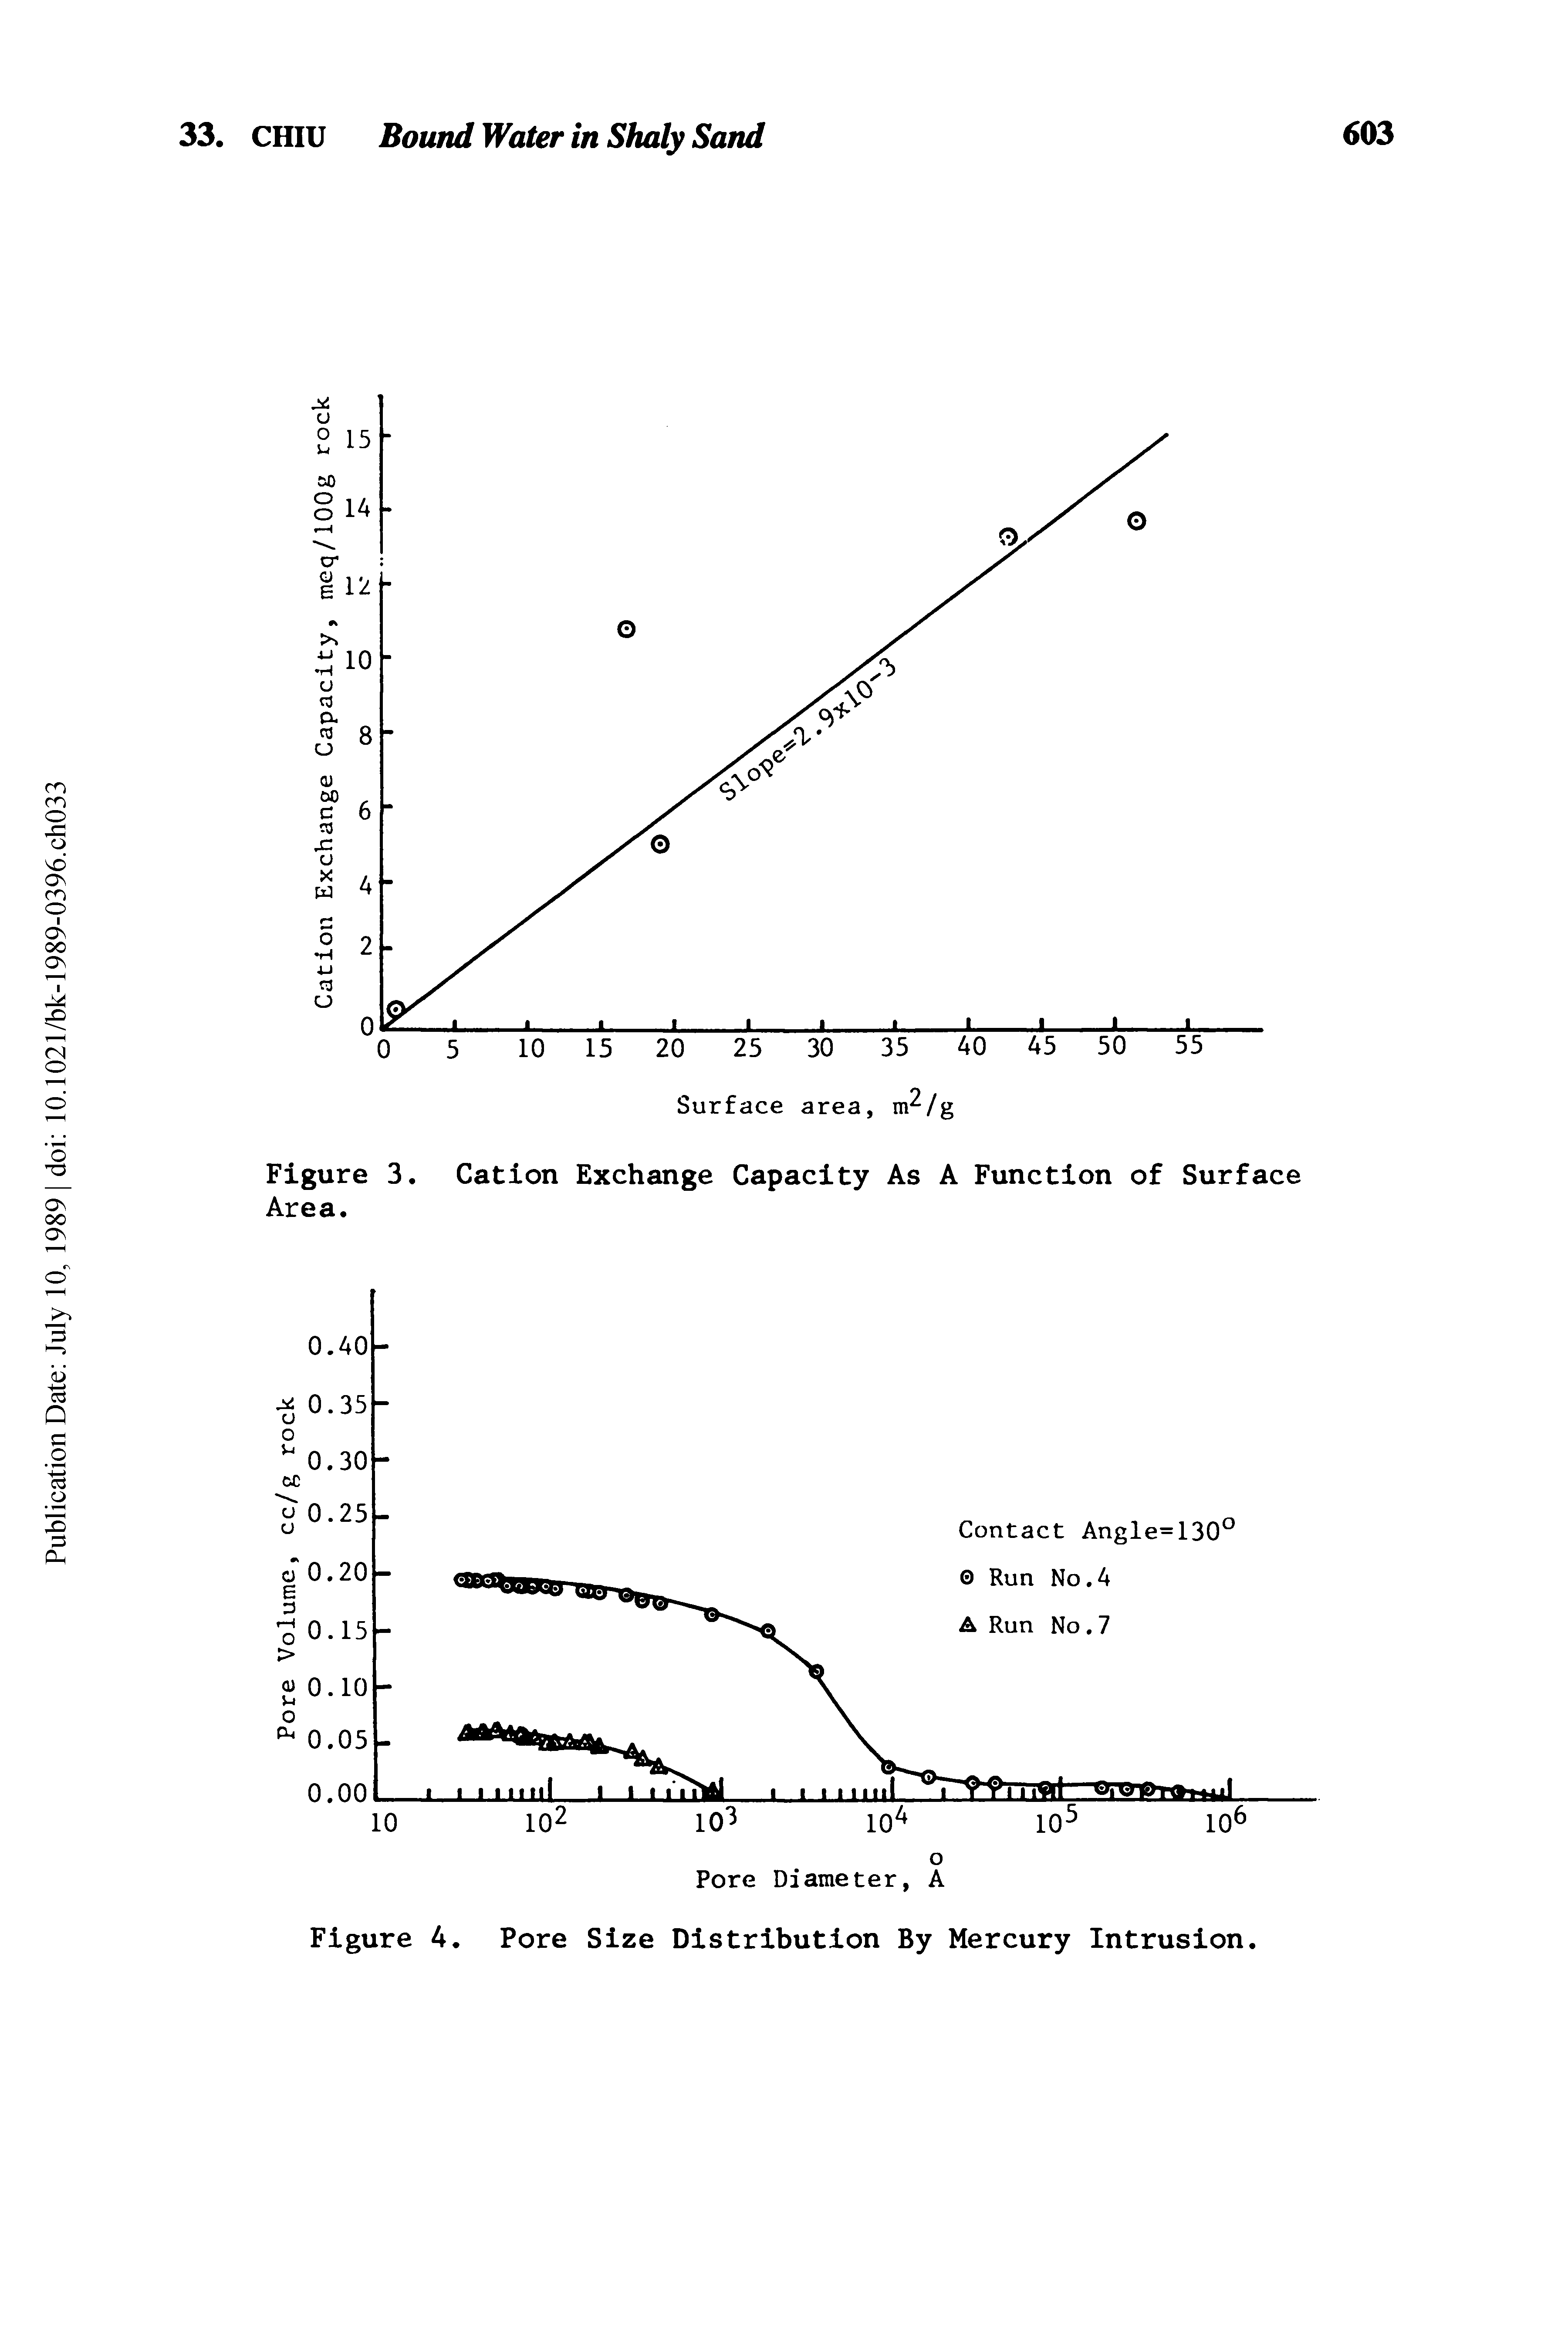 Figure 3. Cation Exchange Capacity As A Function of Surface Area.